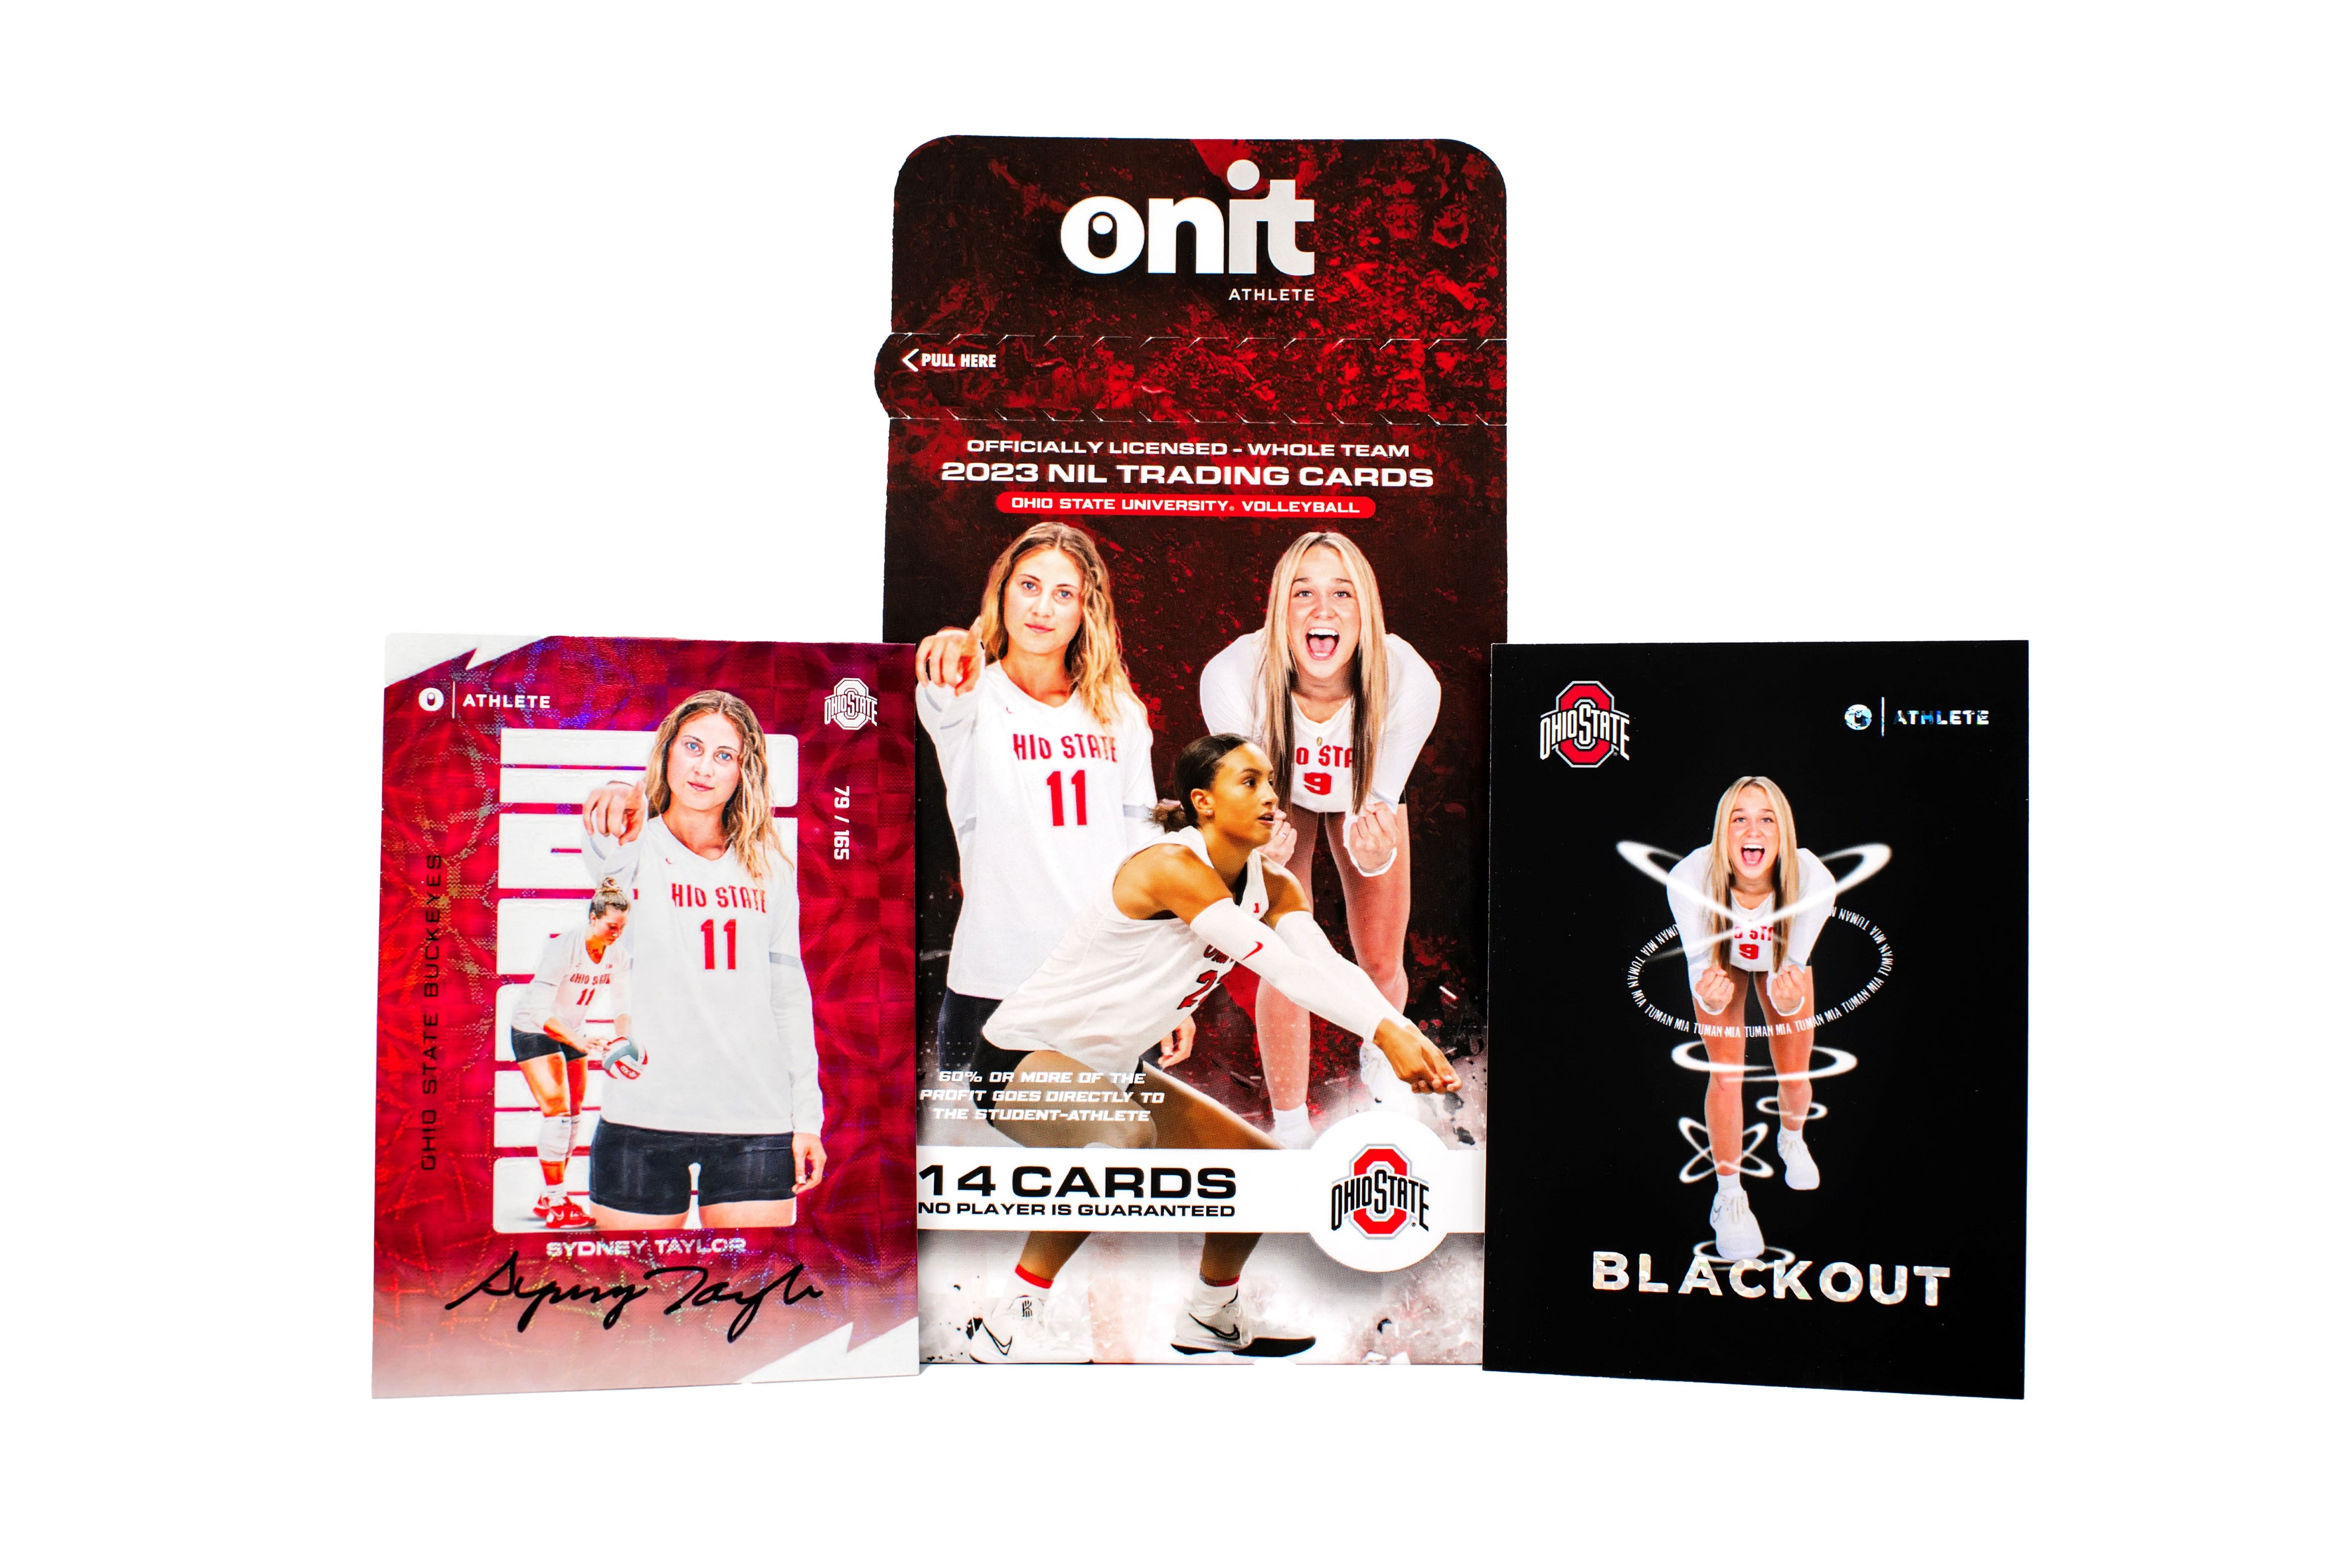 The Ohio State University® NIL Volleyball - 2023 Trading Cards - Single Pack